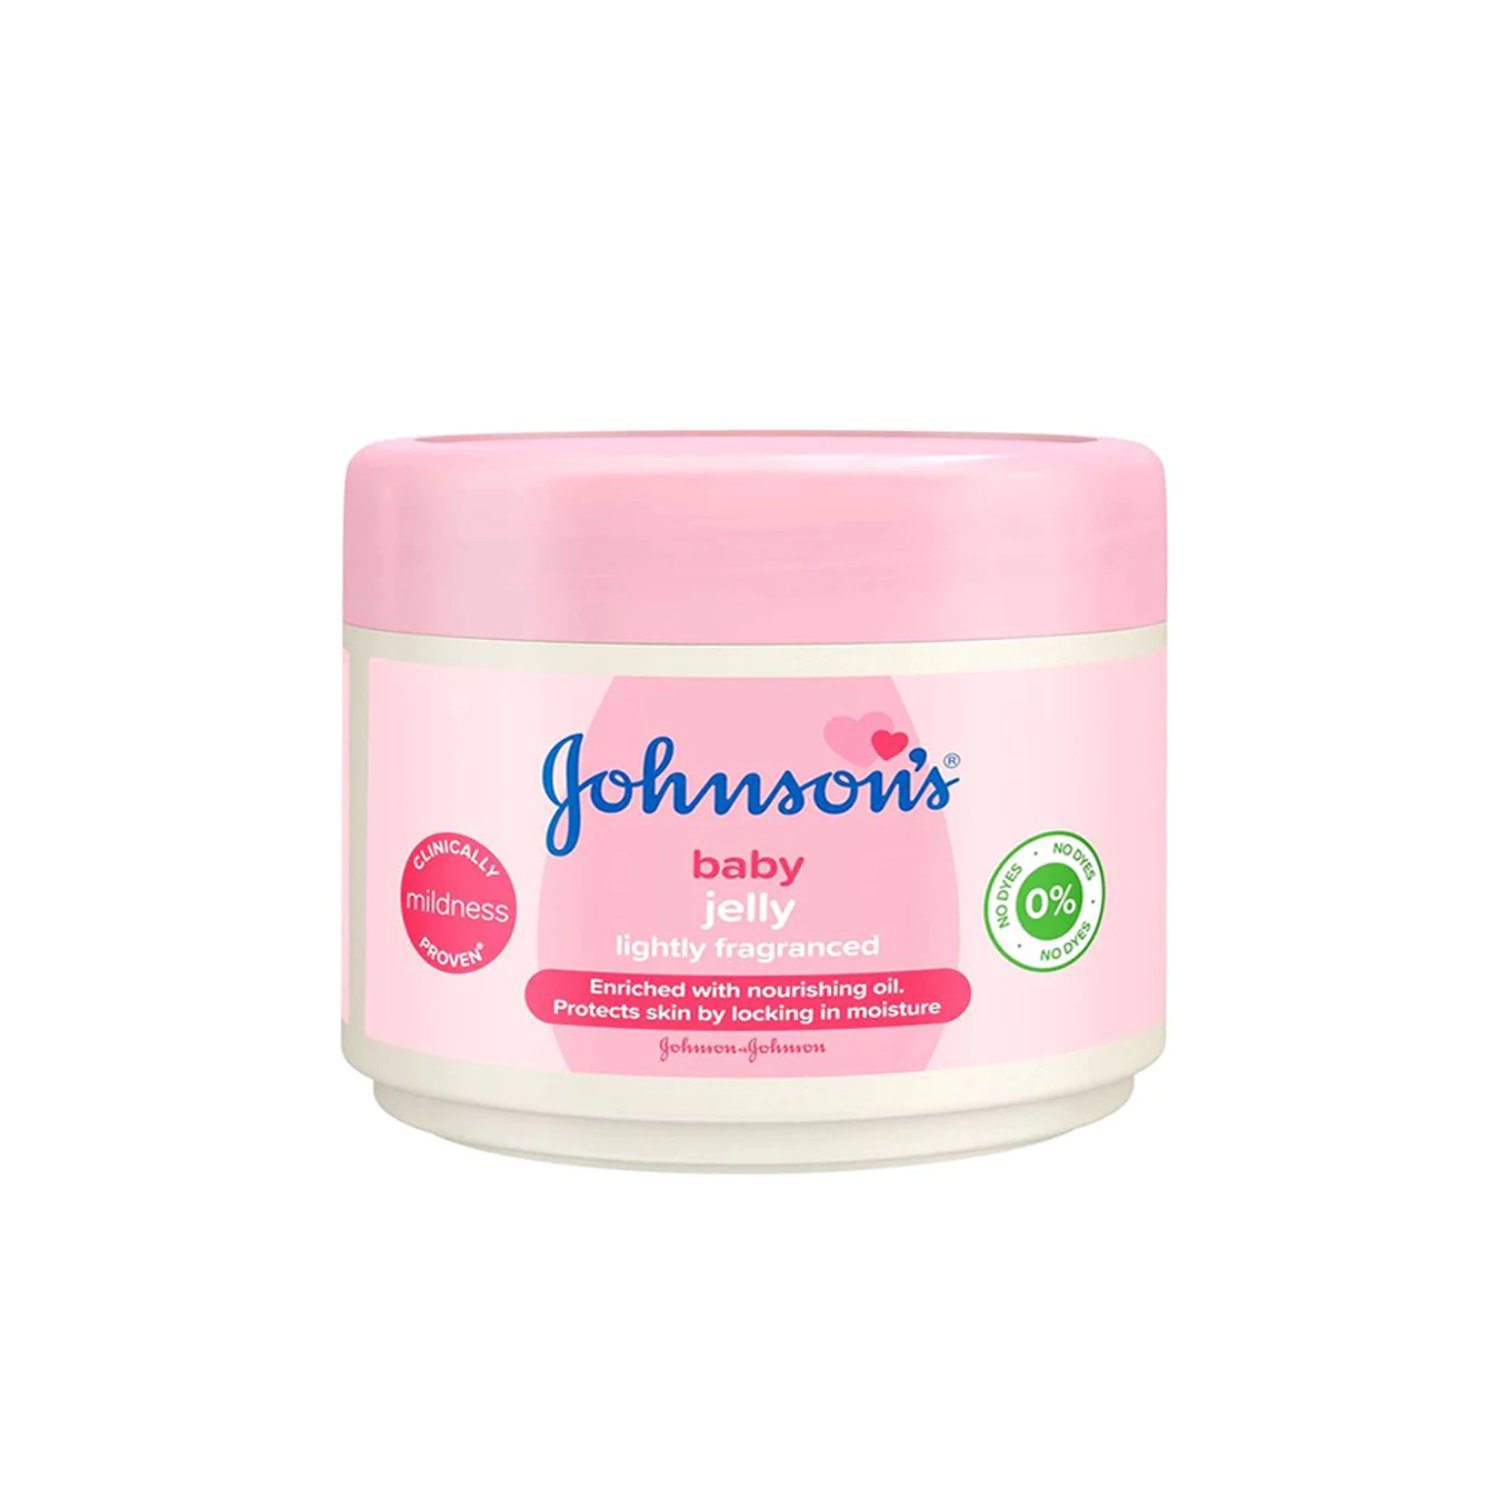 johnsons-baby-jelly-lightly-fragranced-south-africa-100ml